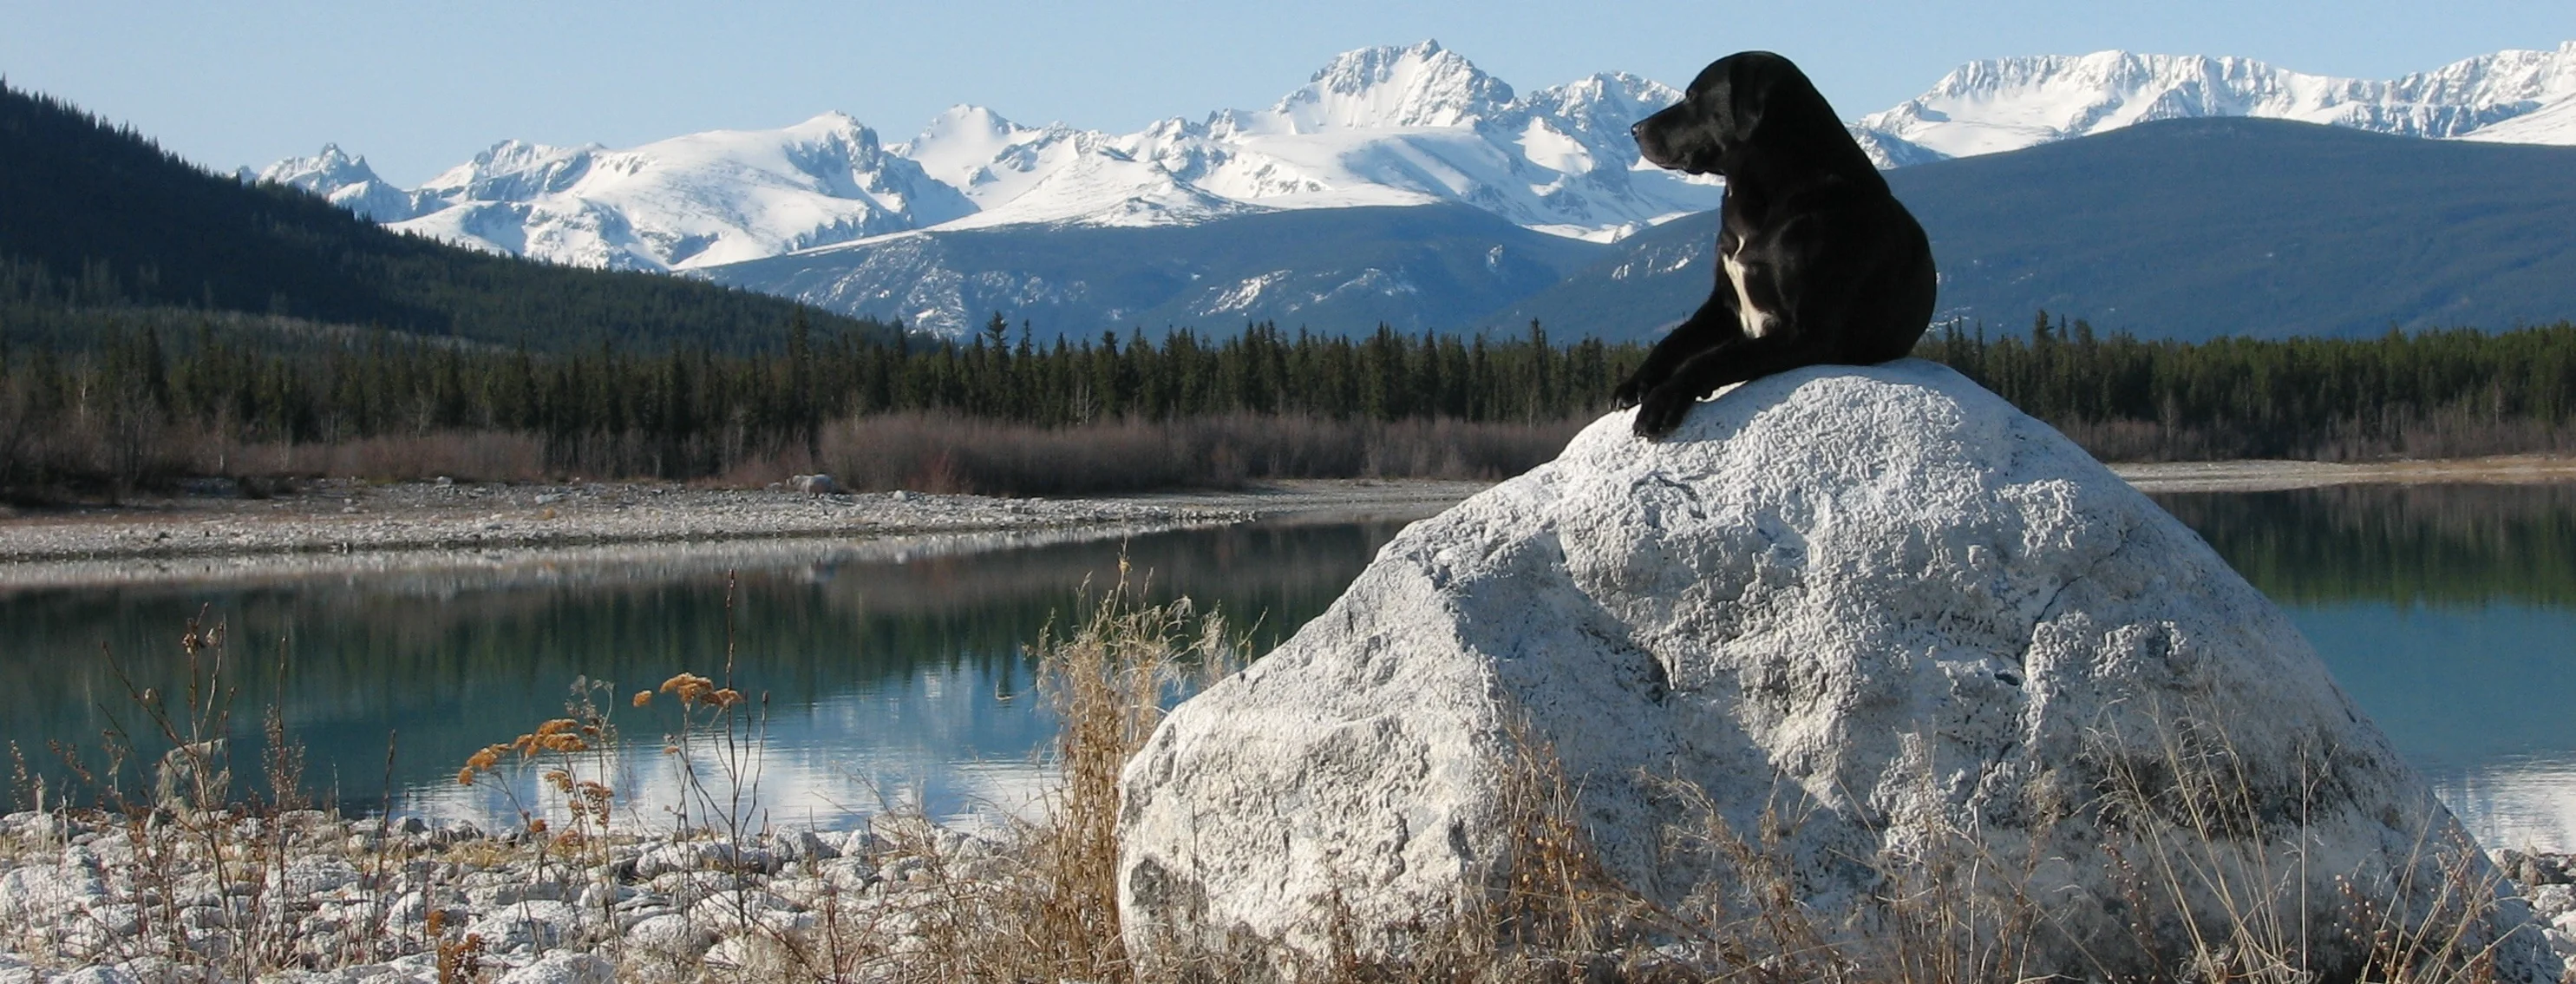 Dog on a rock in front of a lake and mountains